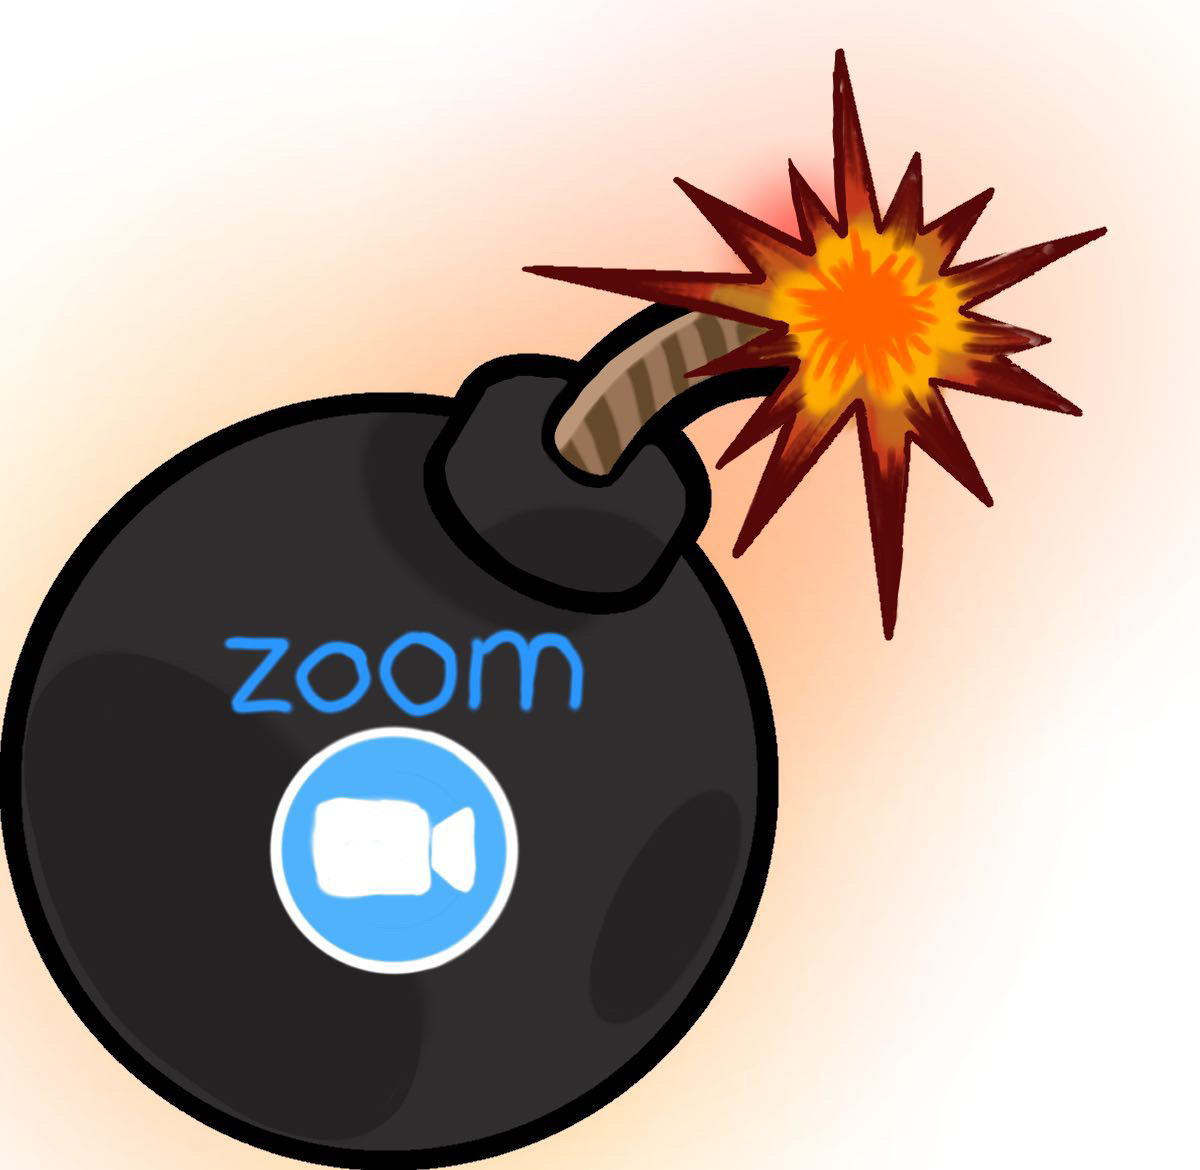 Duck! Its a zoom bomb!